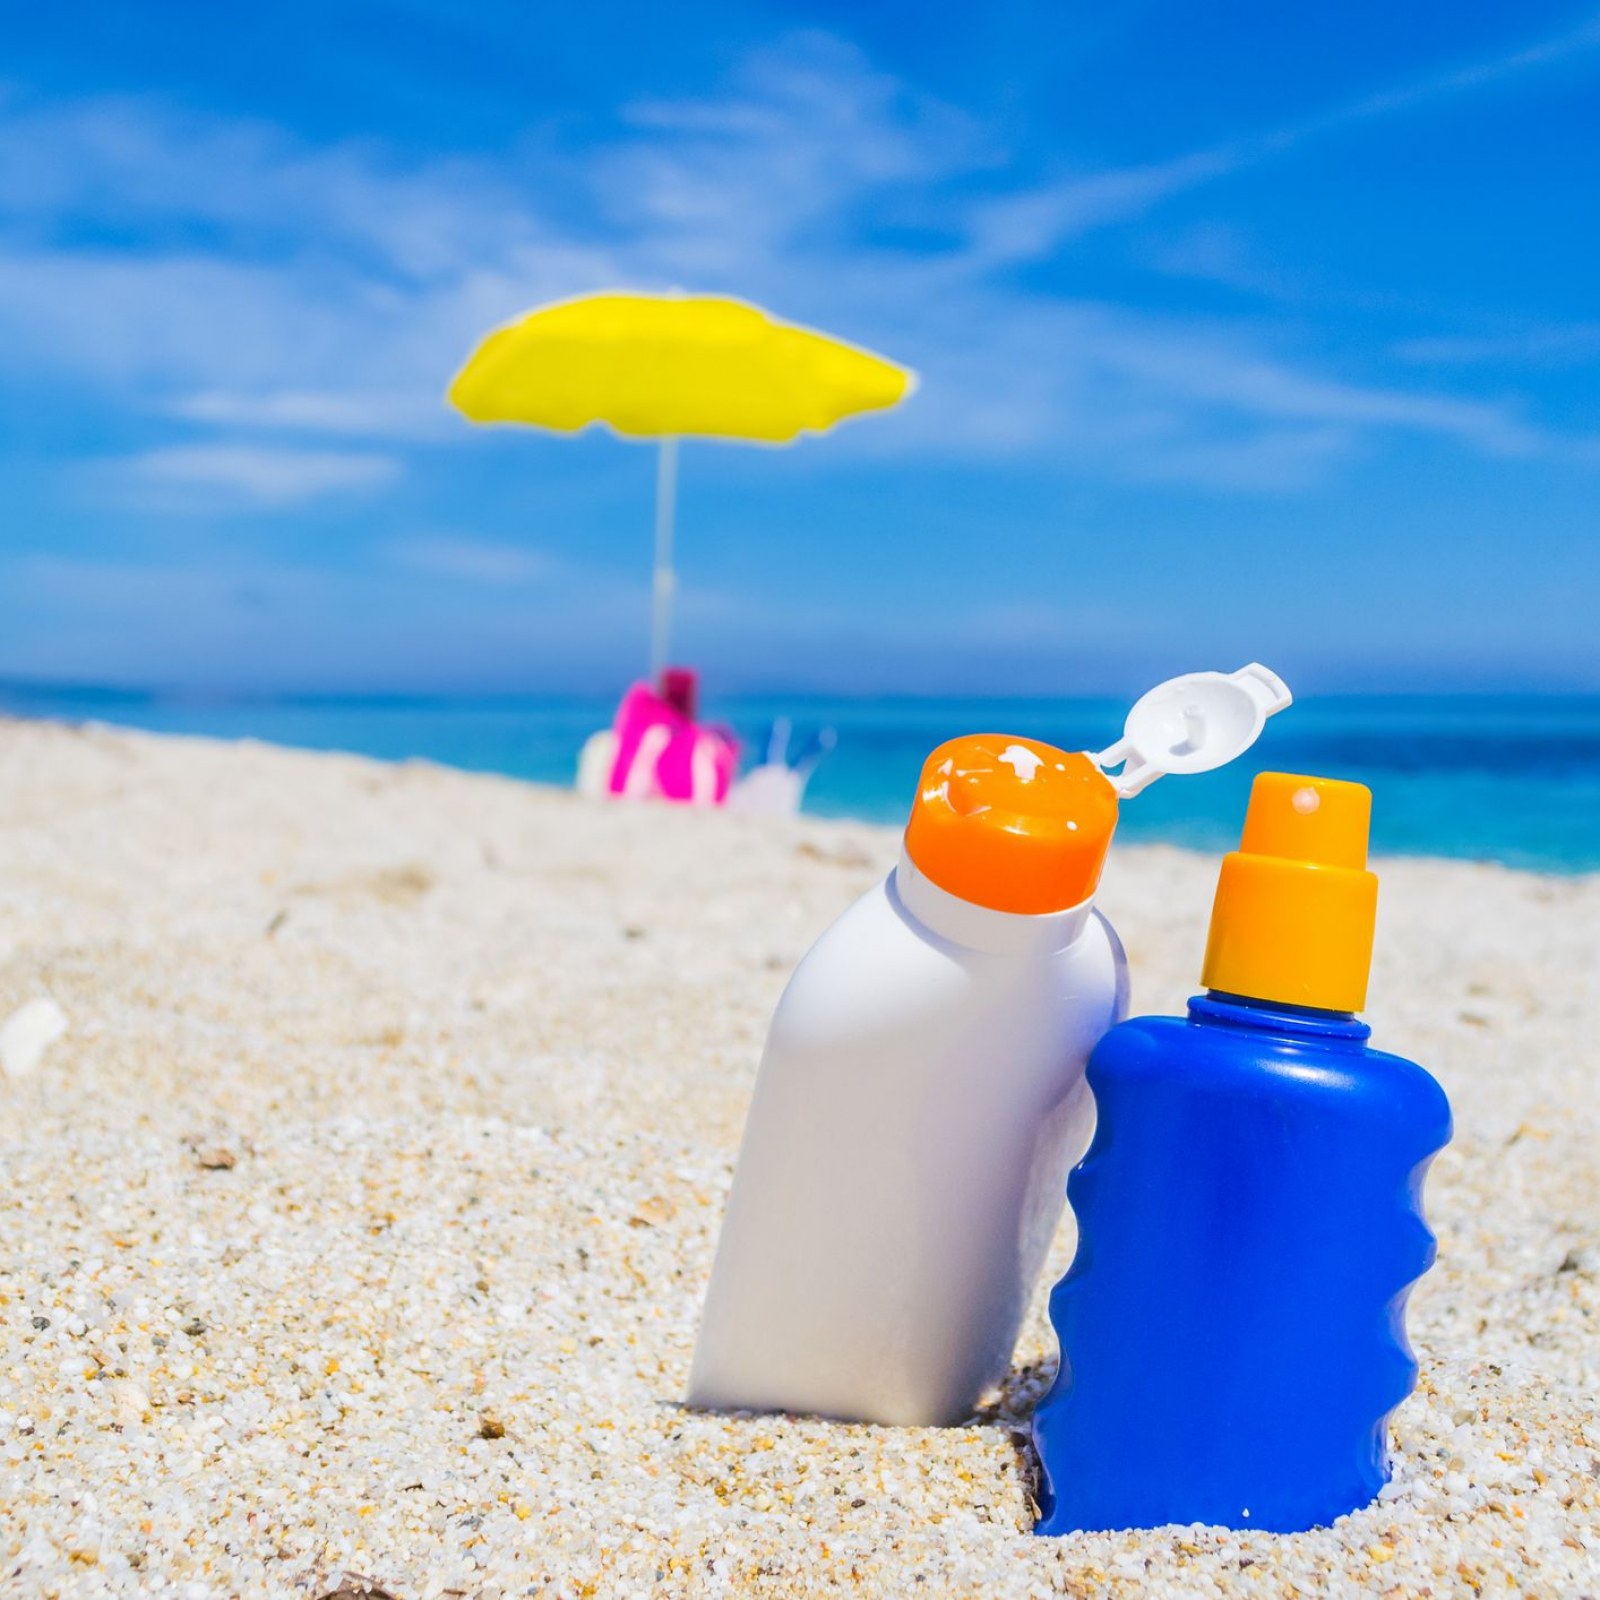 Sunscreen May Be Bad for Your Health, Study Finds